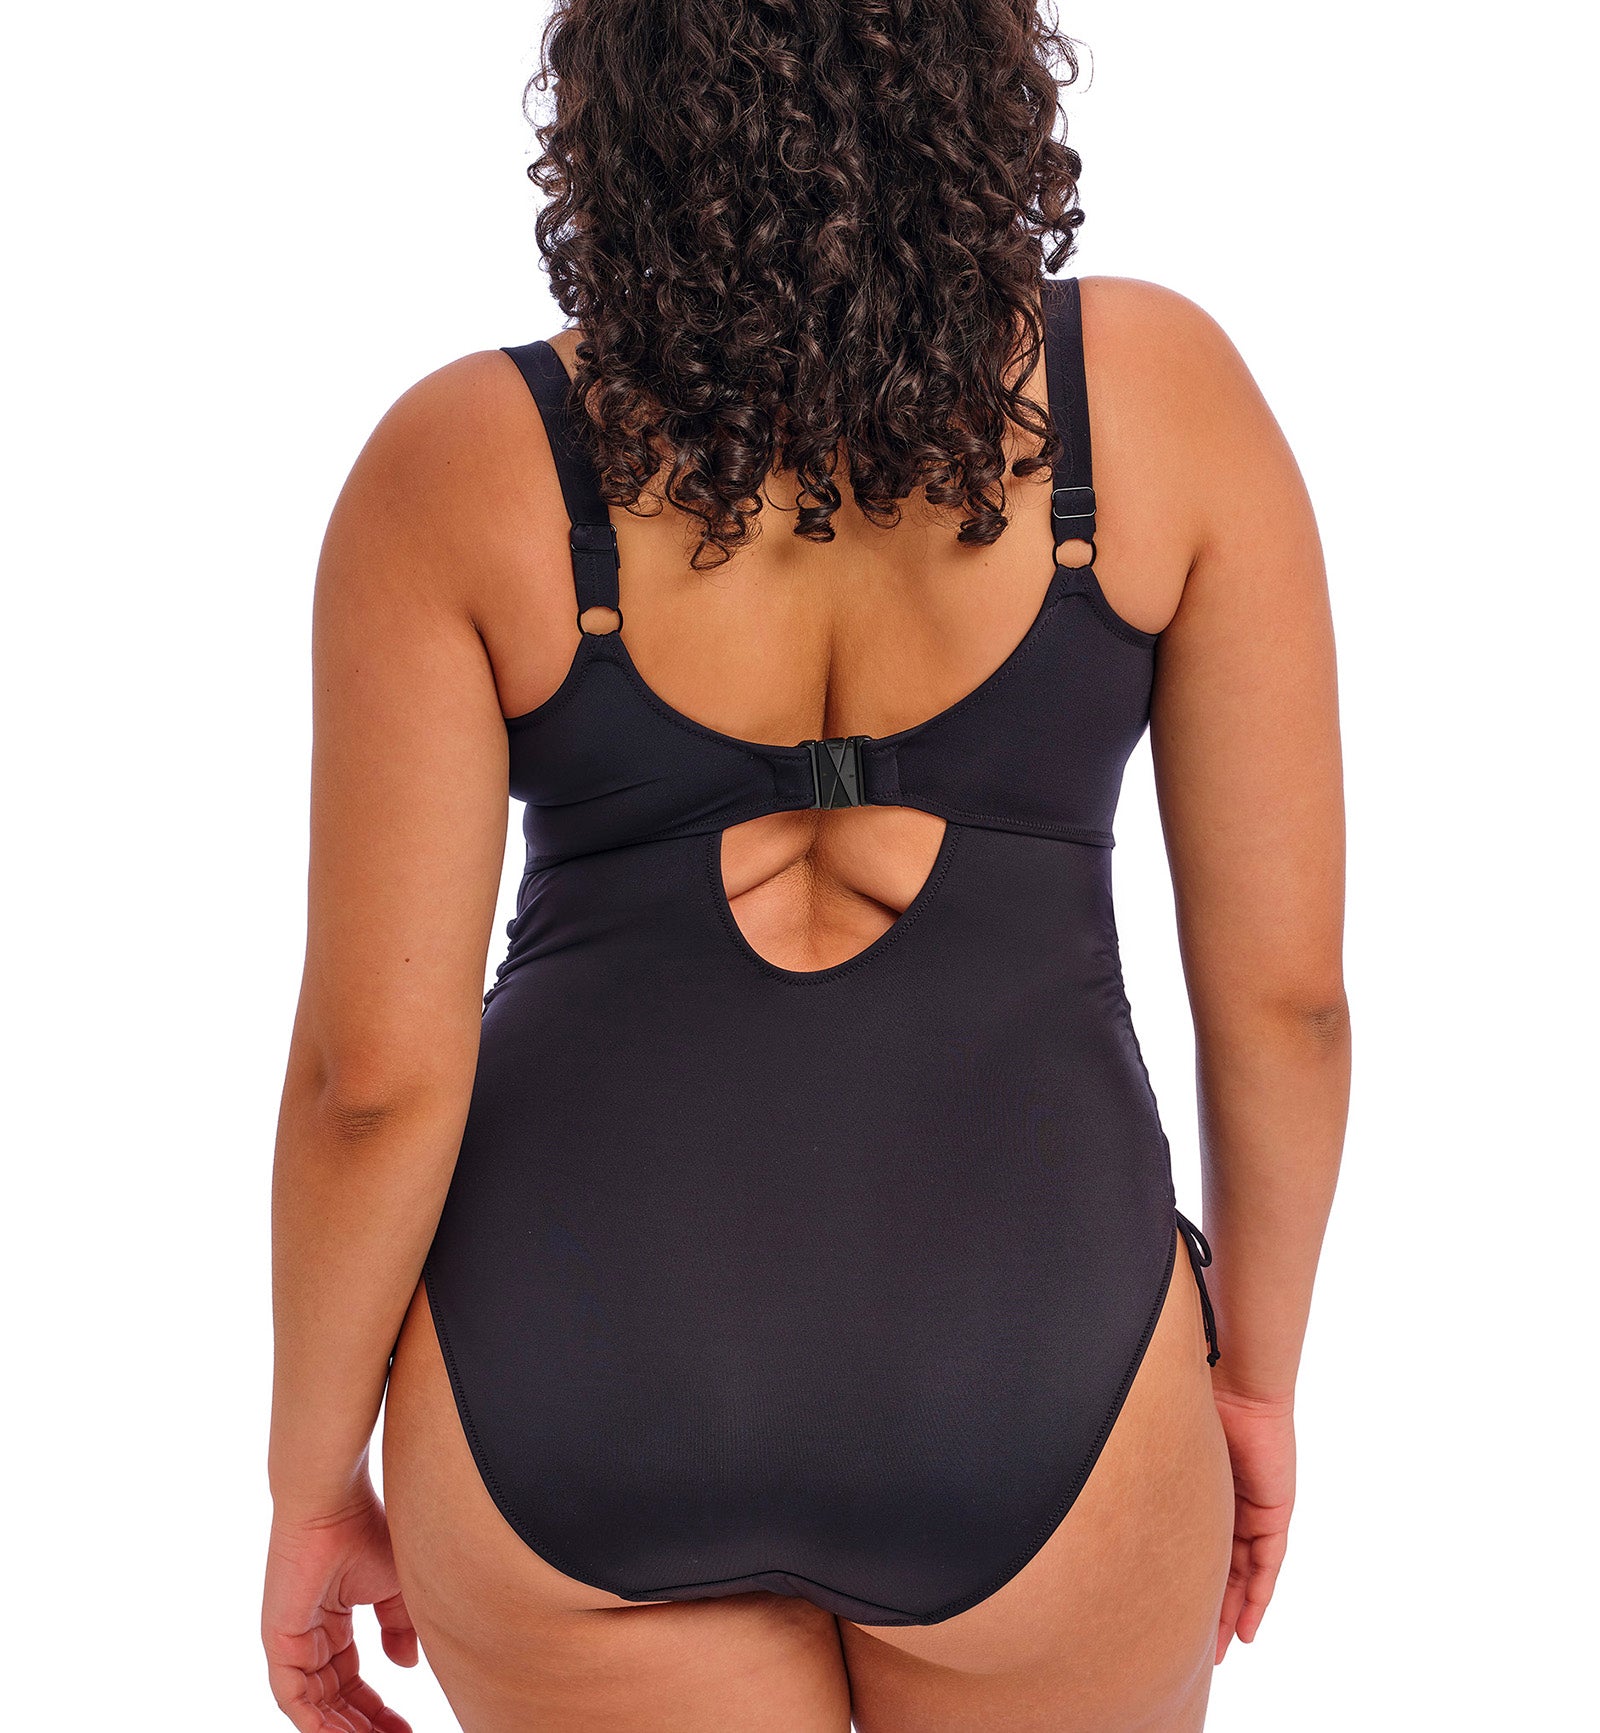 Elomi Cabana Nights Scoop Non Wire One Piece Swimsuit (ES801643),34 G/GG,Multi - Multi,34 G/GG